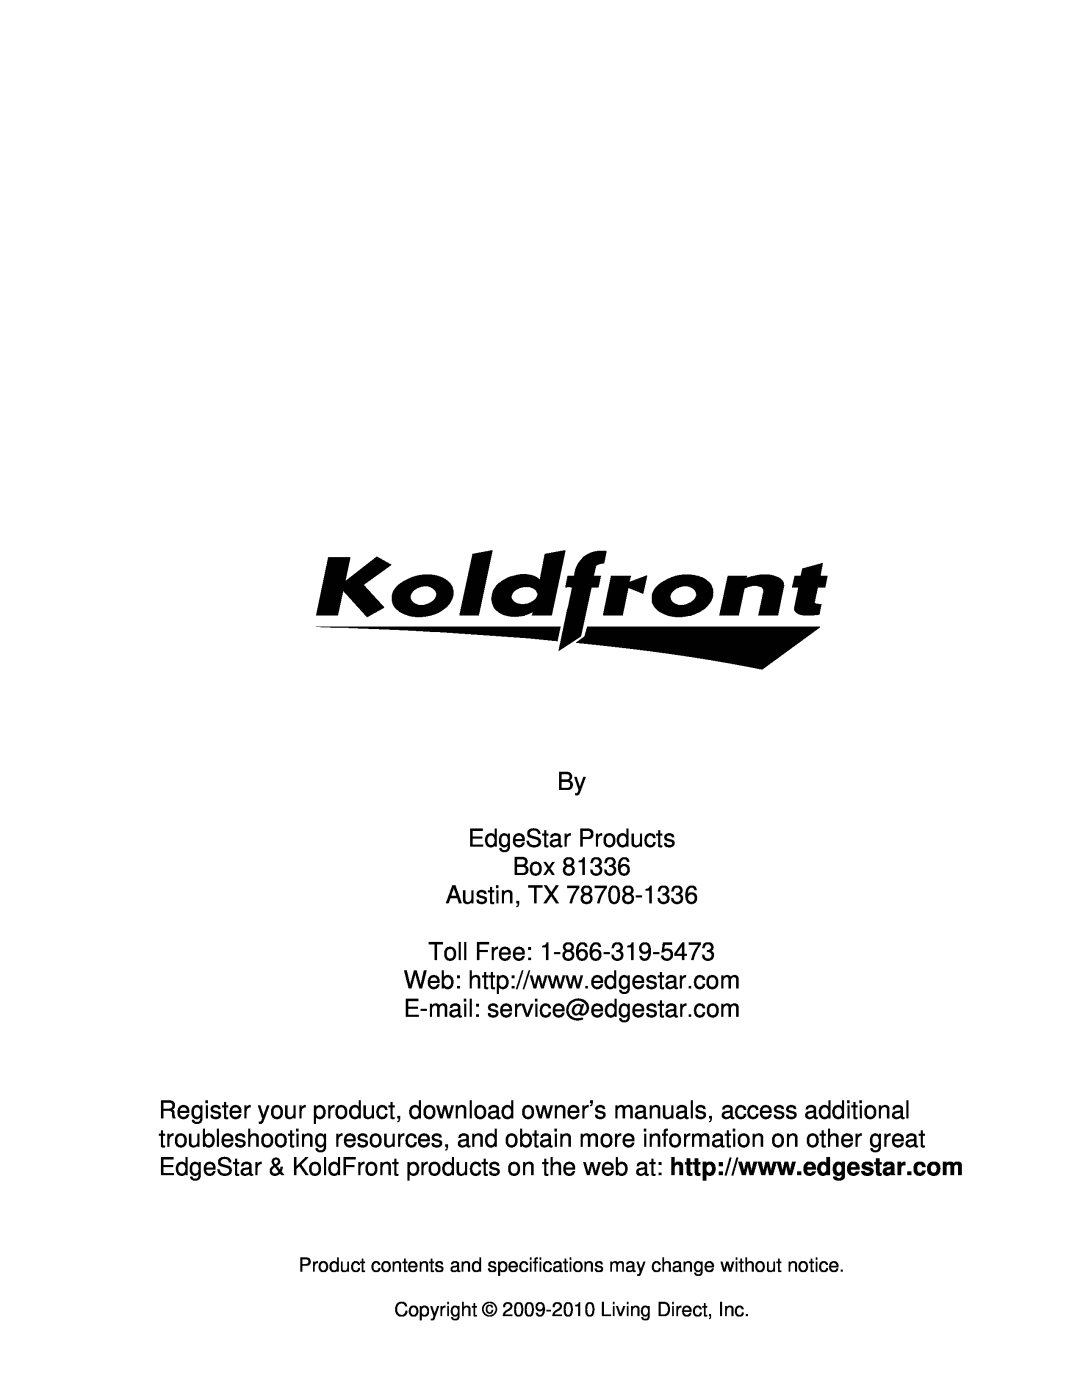 KoldFront KIM202W owner manual By EdgeStar Products Box Austin, TX Toll Free, Copyright 2009-2010Living Direct, Inc 